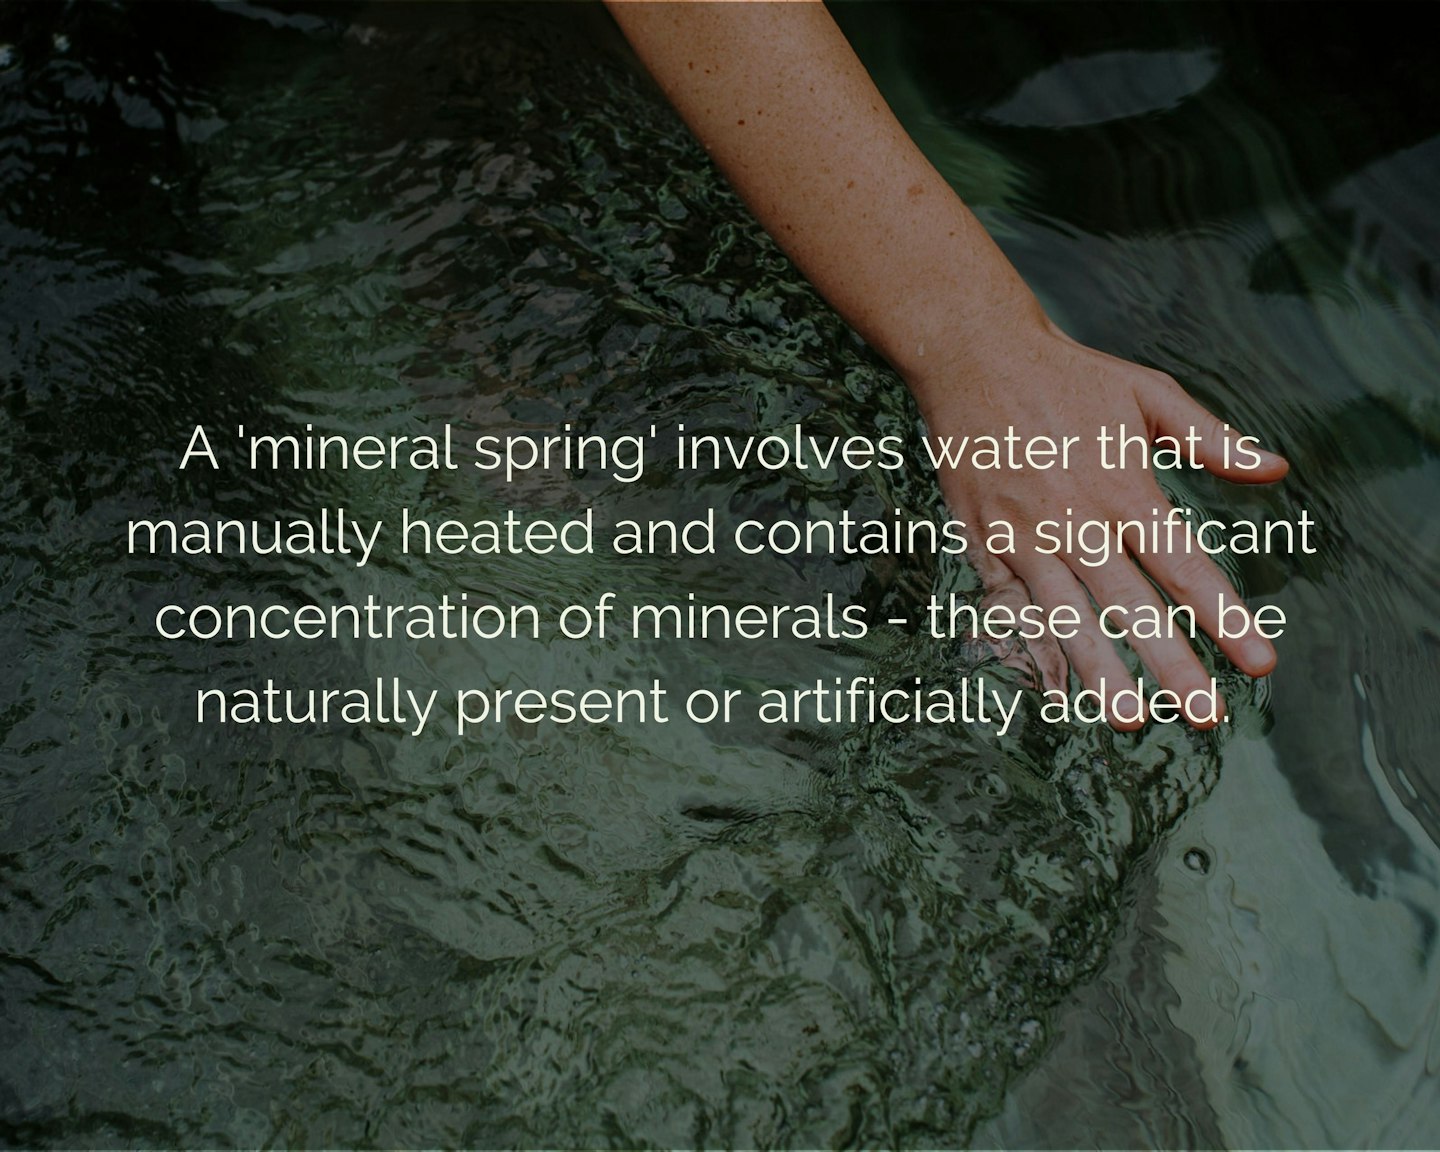 Text "A 'mineral spring' involves water that is manually heated and contains a significant concentration of minerals - these can be naturally present or artificially added" overlaying an image of water with a hand running through.